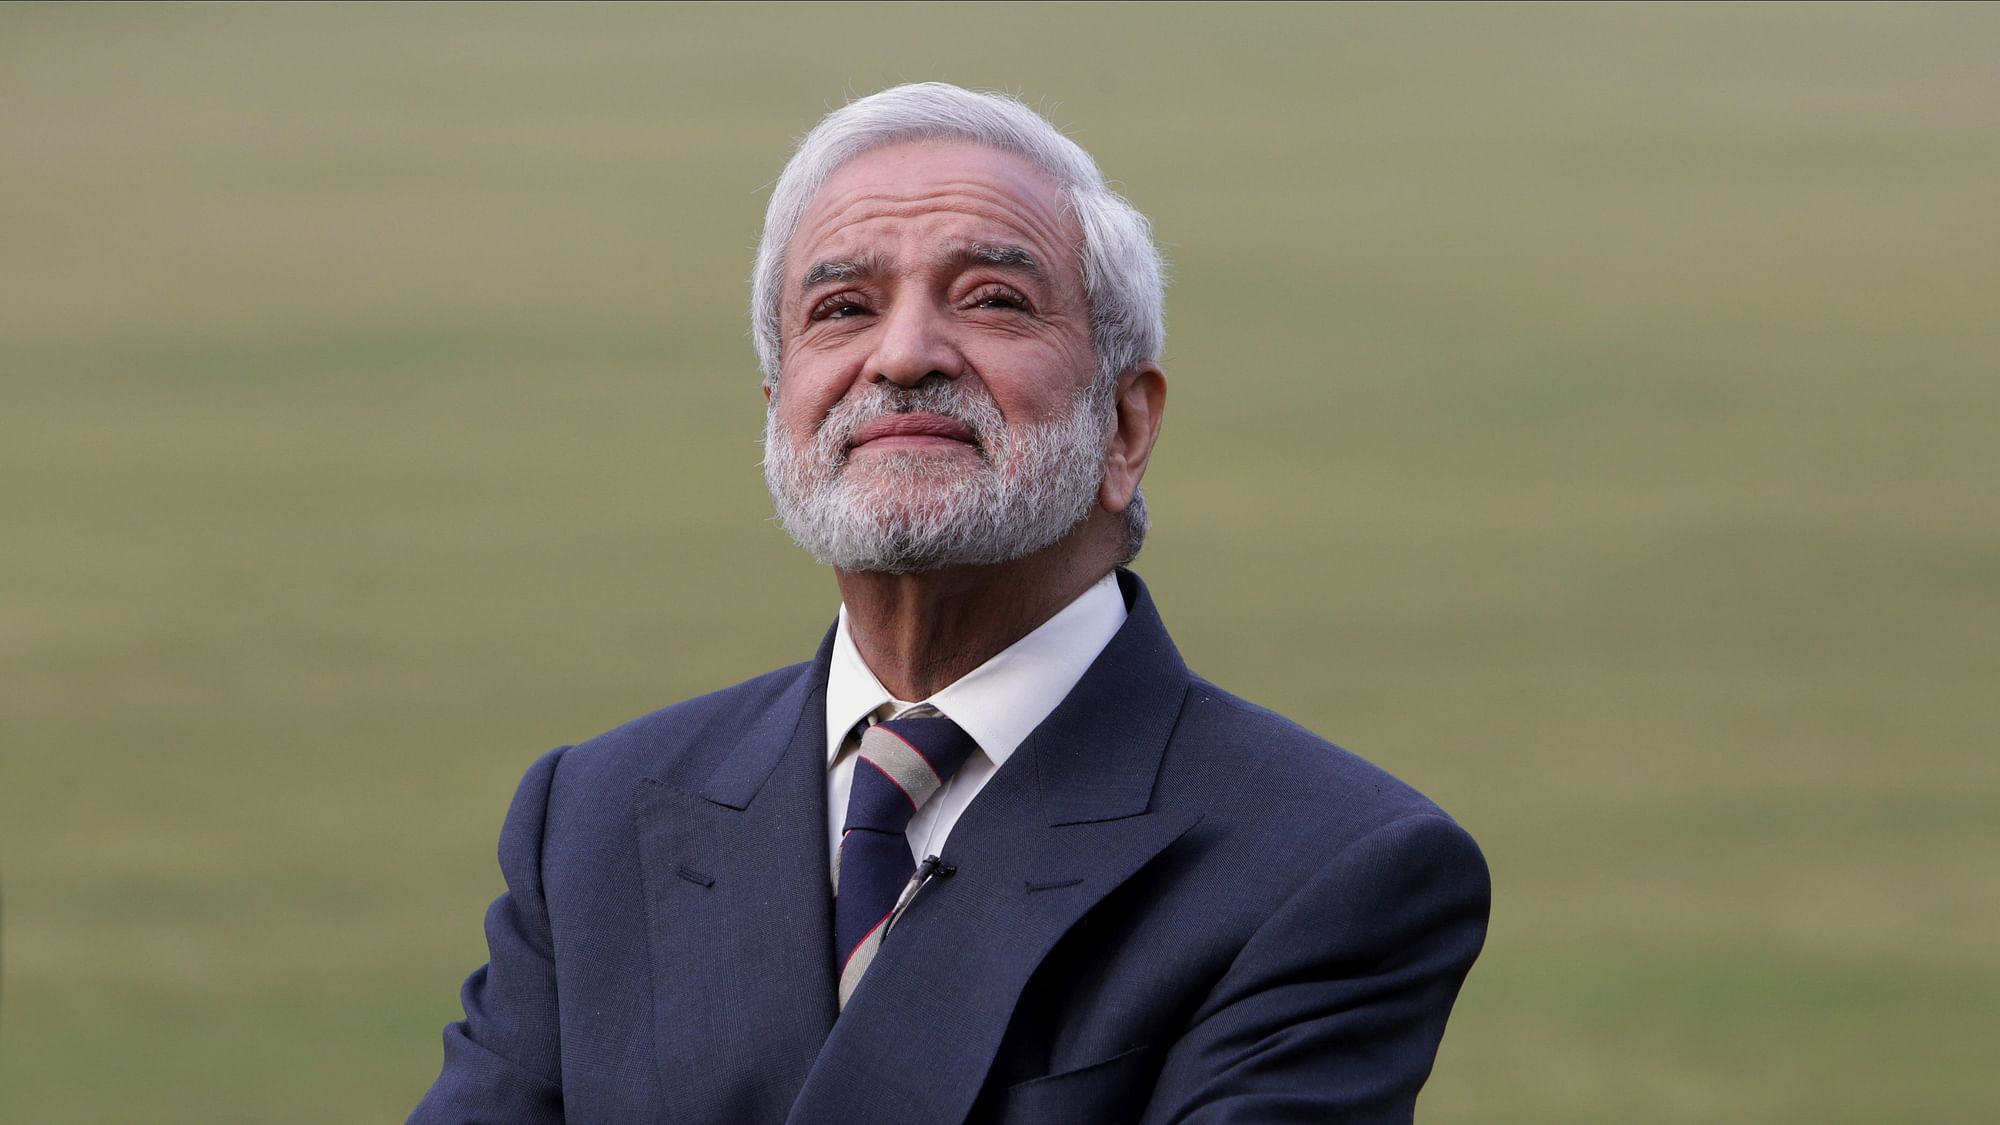 Holding the 2020 T20 World Cup in Australia as per schedule would not be possible according to Pakistan Cricket Board (PCB) Chairman Ehsan Mani.